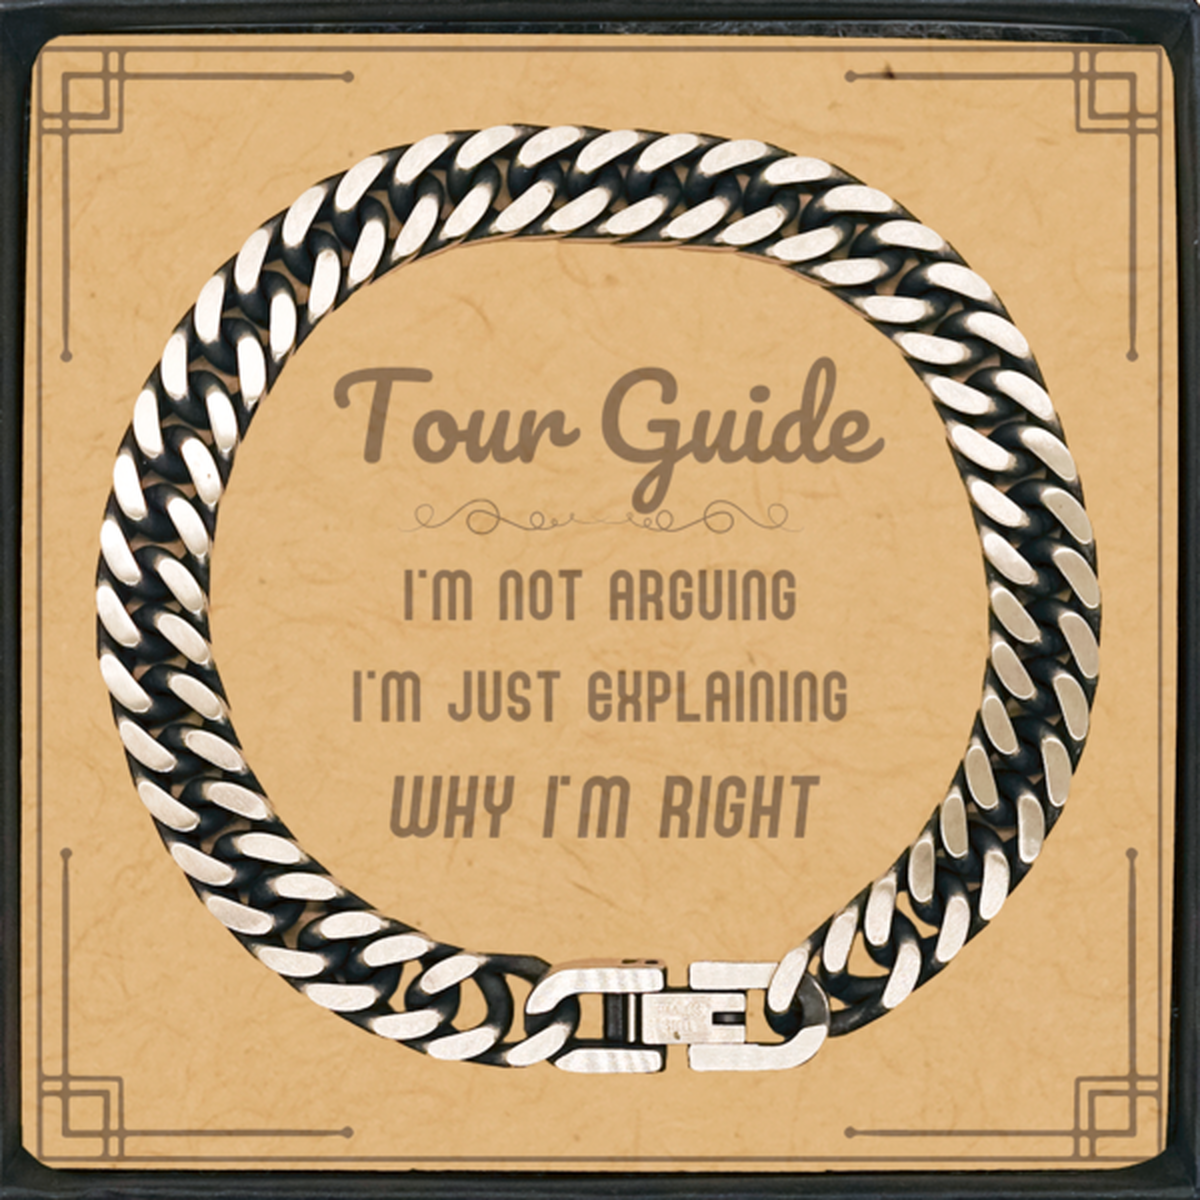 Tour Guide I'm not Arguing. I'm Just Explaining Why I'm RIGHT Cuban Link Chain Bracelet, Funny Saying Quote Tour Guide Gifts For Tour Guide Message Card Graduation Birthday Christmas Gifts for Men Women Coworker